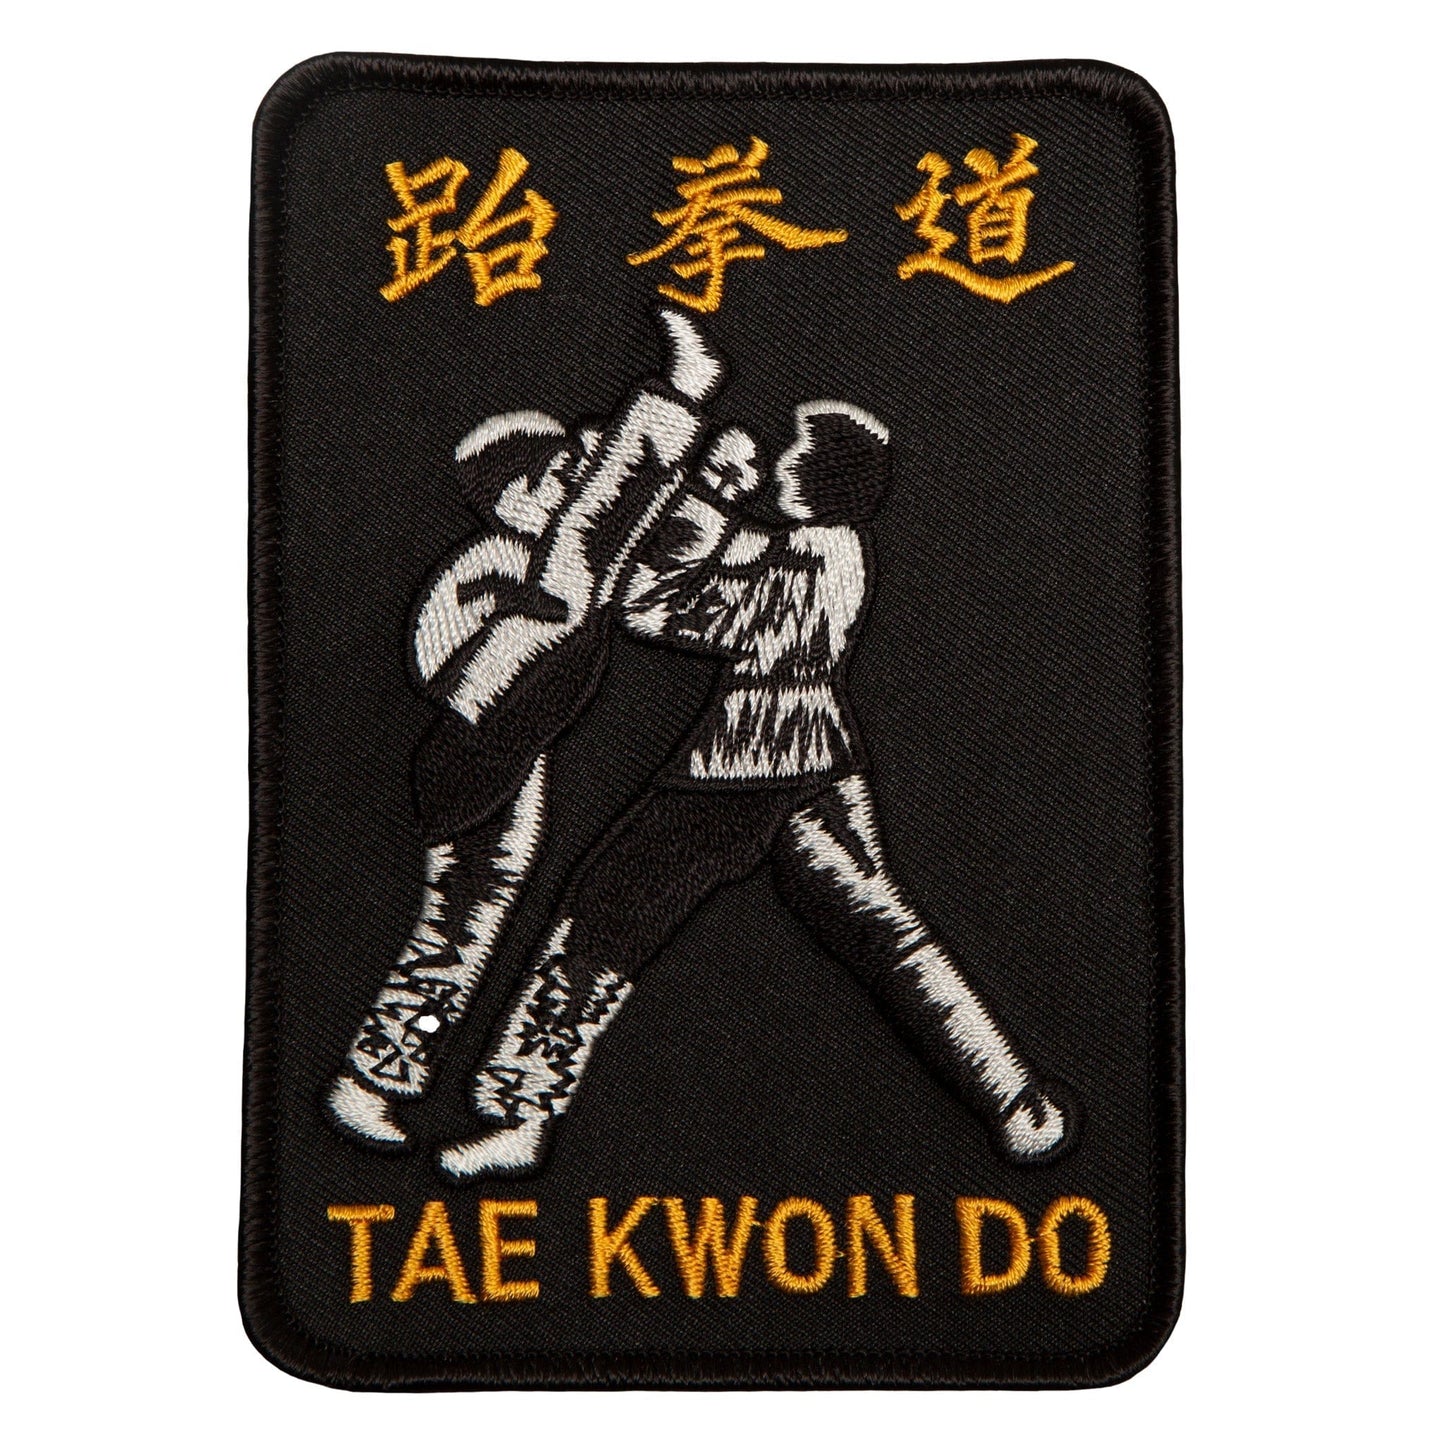 EclipseMartialArtsSupplies sporting goods Tae Kwon Do Fighters Patch Martial Arts Uniform Patch